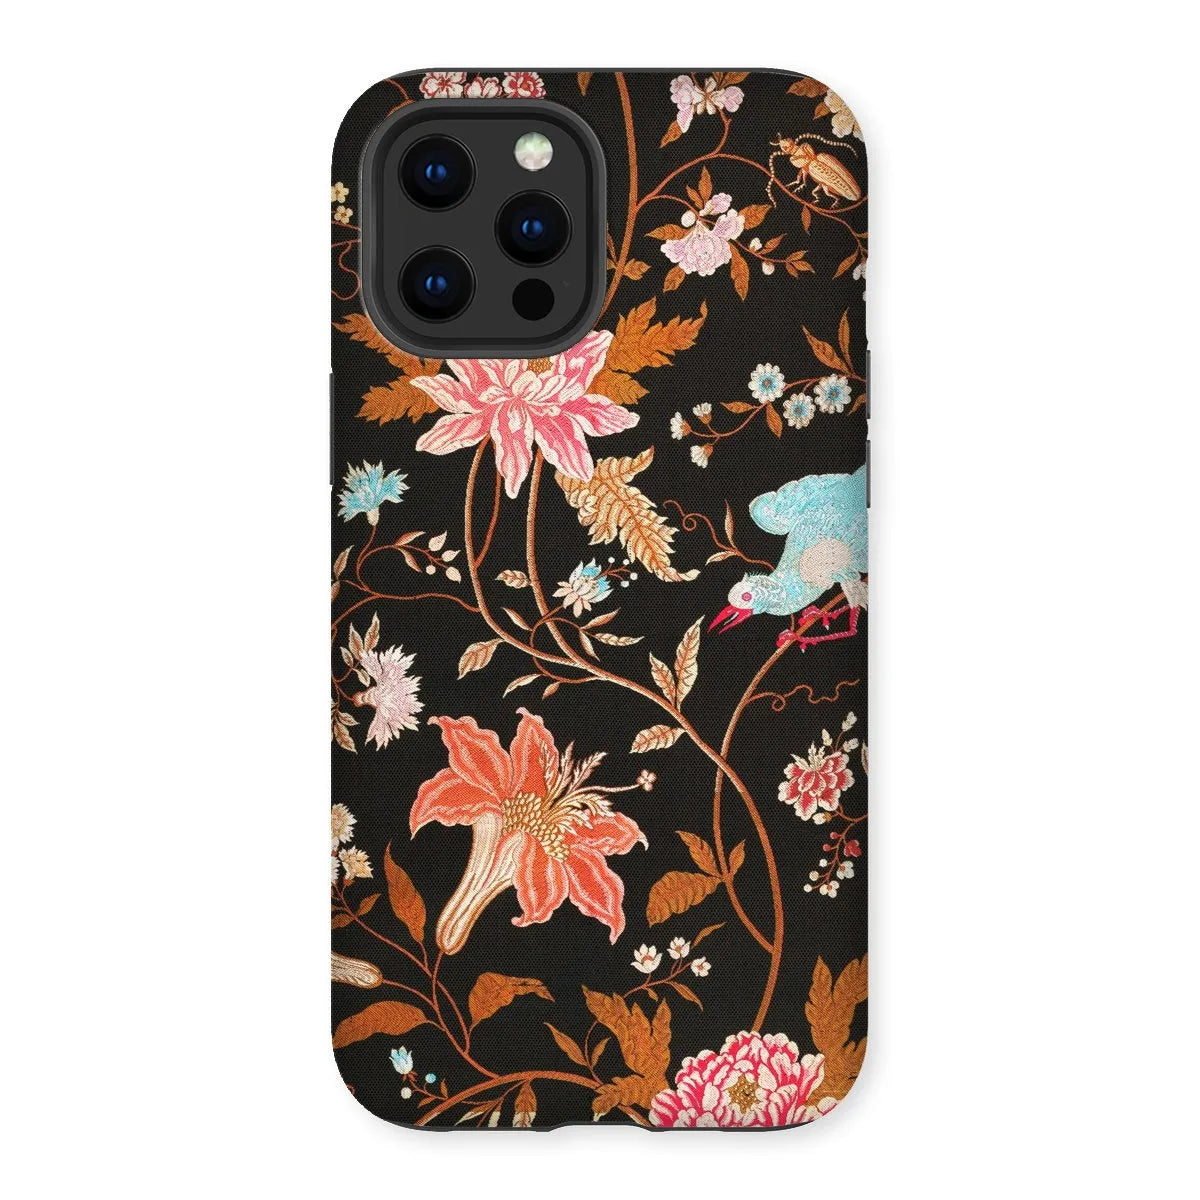 Midnight Call - Indian Aesthetic Fabric Art Phone Case - Iphone 12 Pro Max / Matte - Mobile Phone Cases - Aesthetic Art